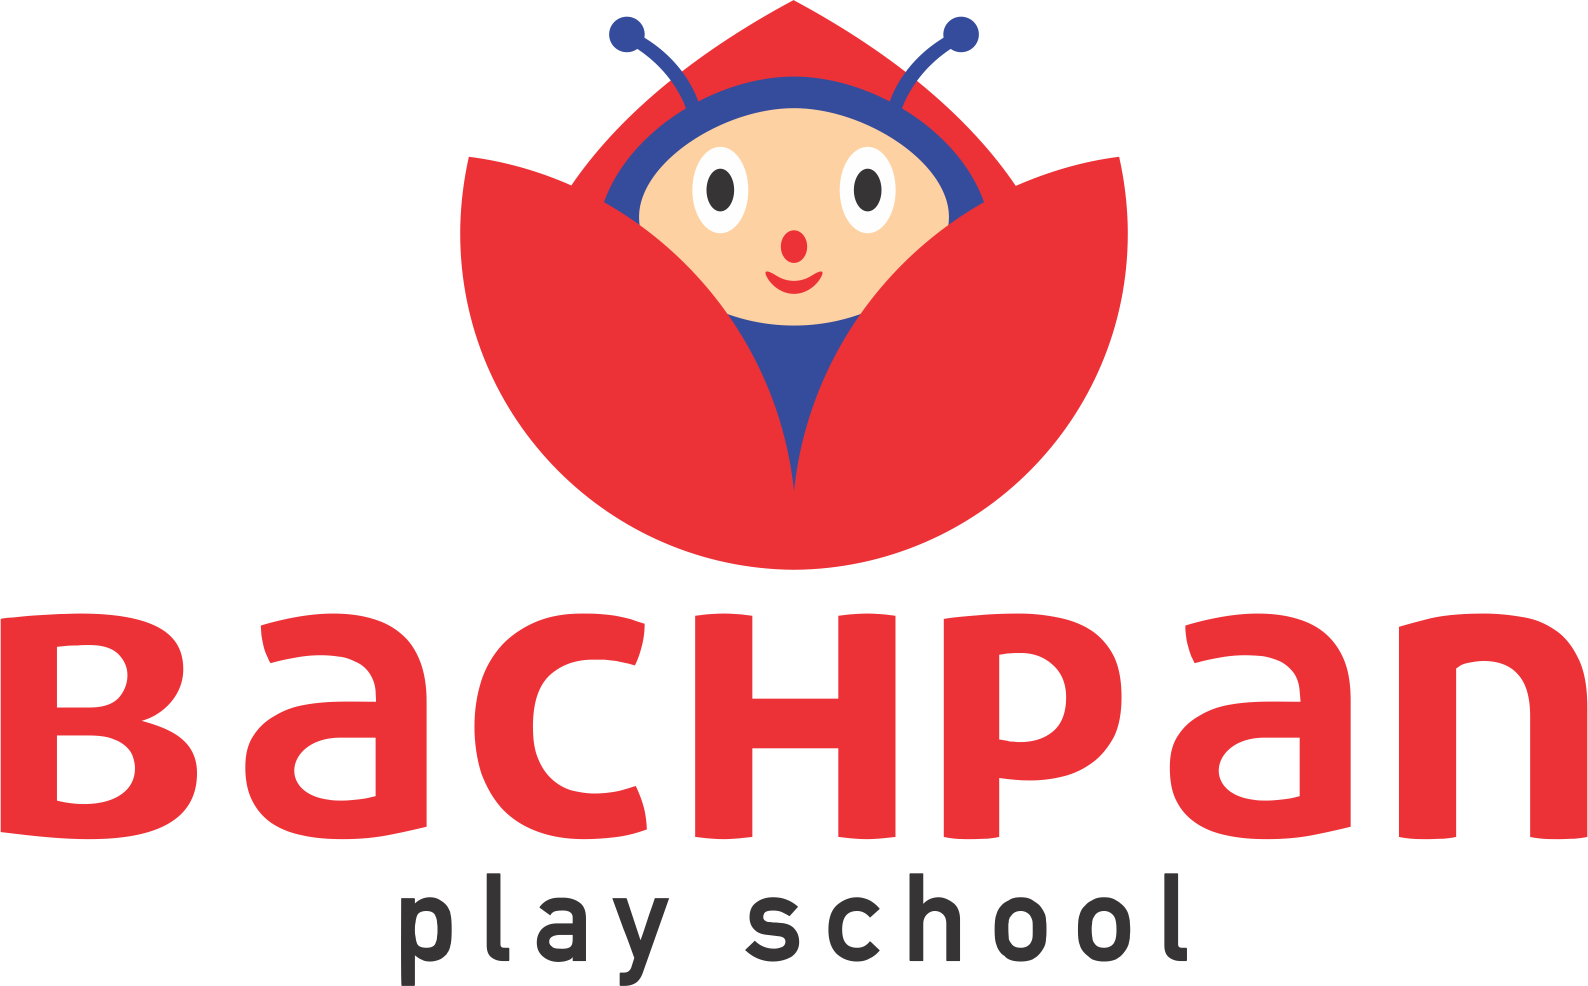 Bachpan Play School, Mansa|Colleges|Education